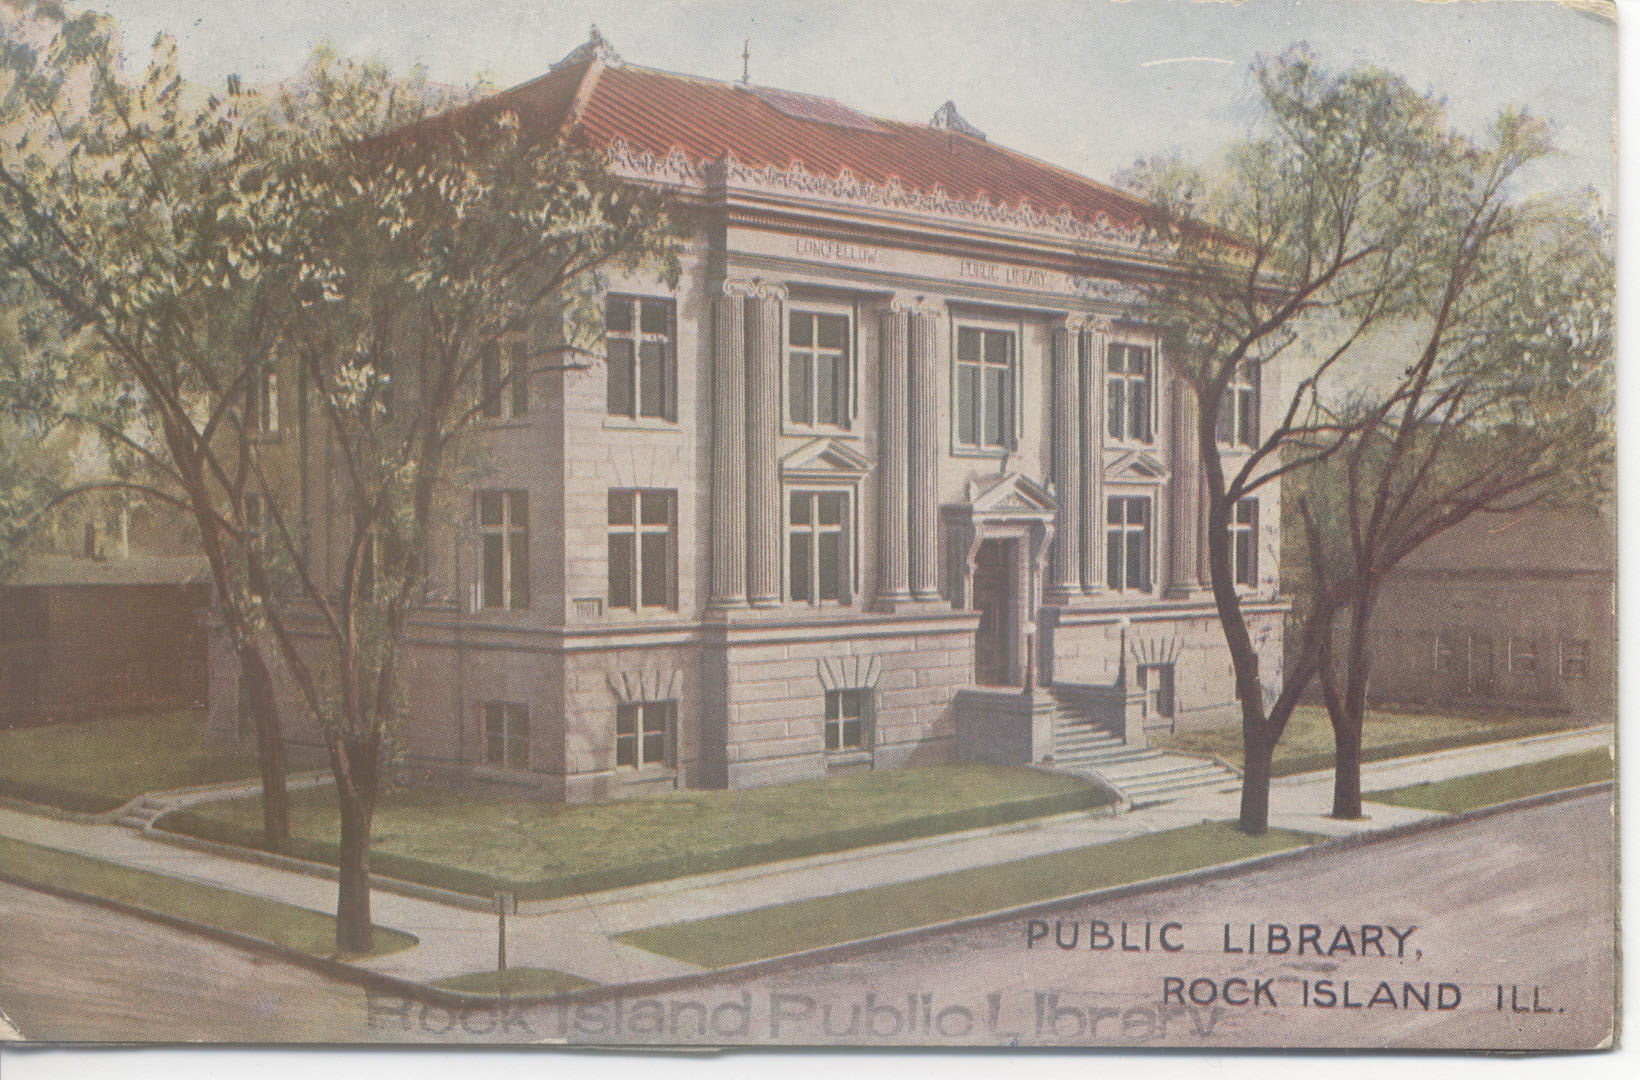 Postcard of colorized photo of historic Rock Island library building